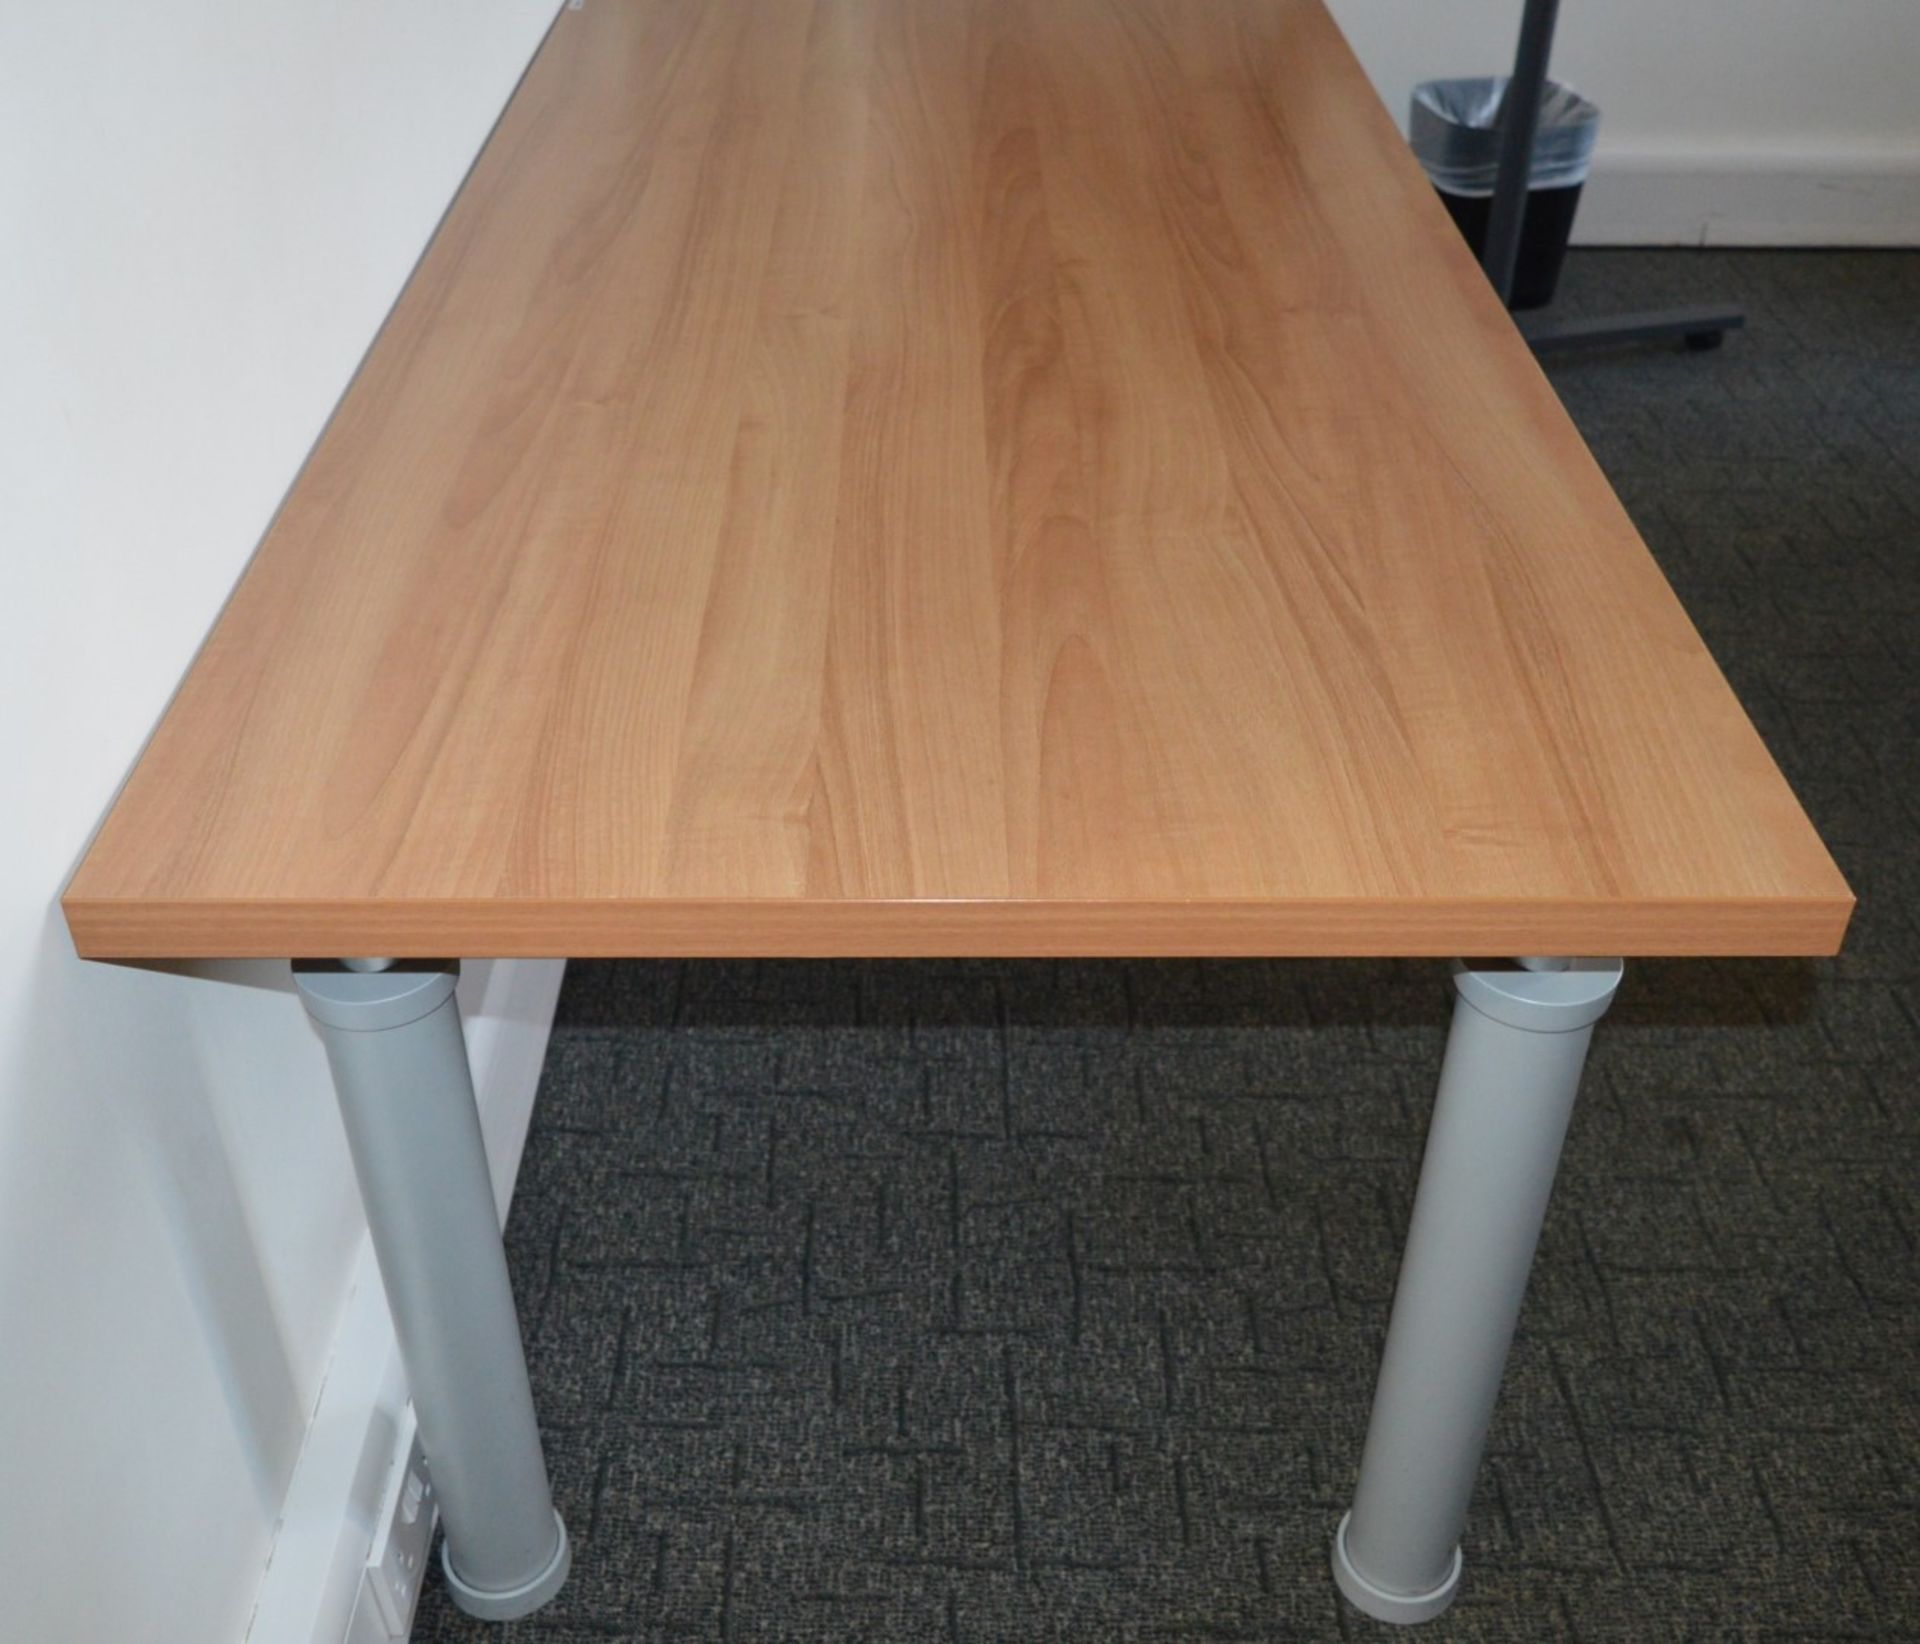 1 x Conference Office Table - Beech Finish - High Quality Office Furniture - H73.5 x W175 x D90 - Image 12 of 13